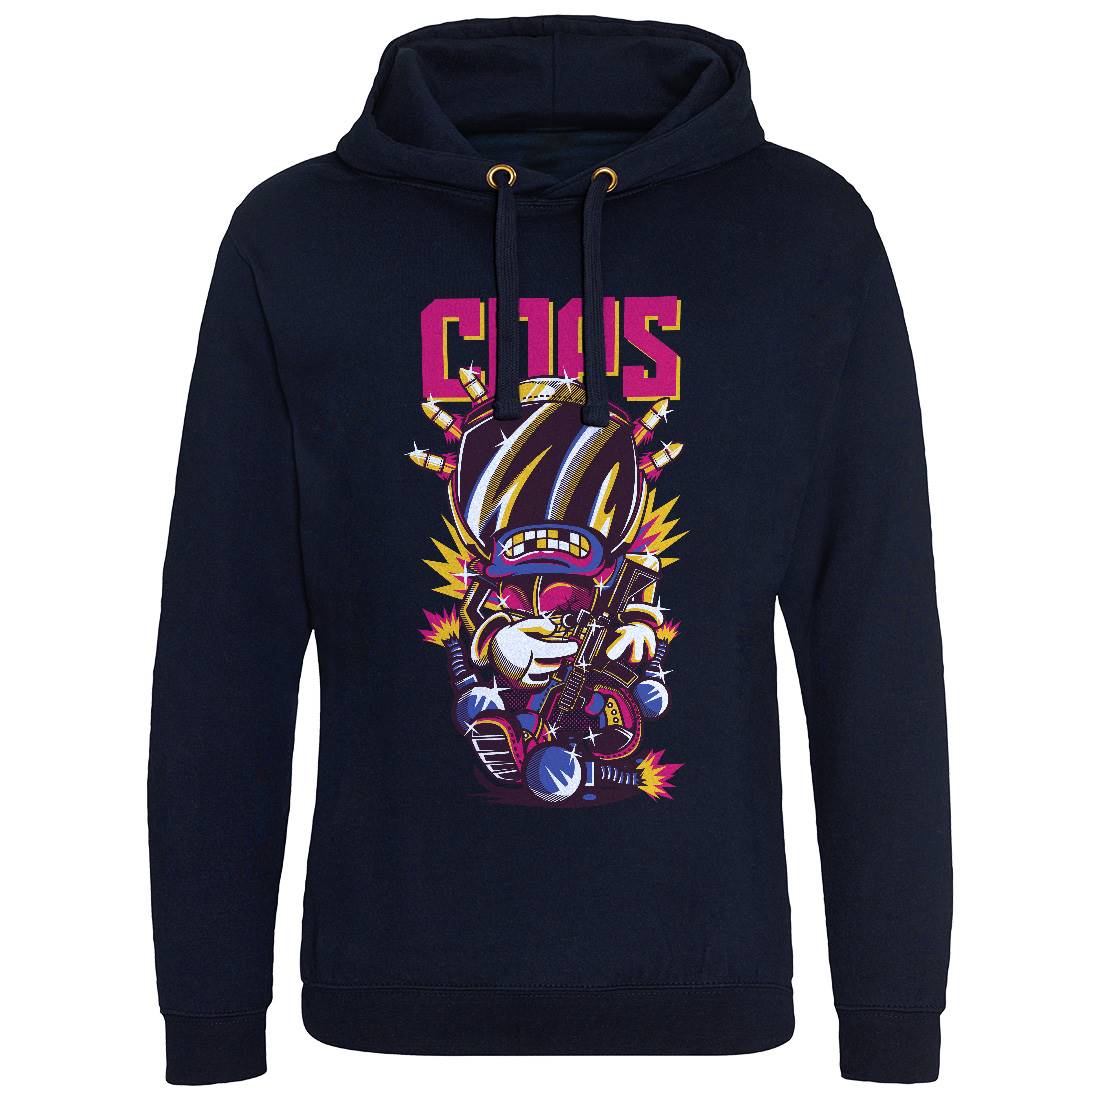 Cops Mens Hoodie Without Pocket Space D734